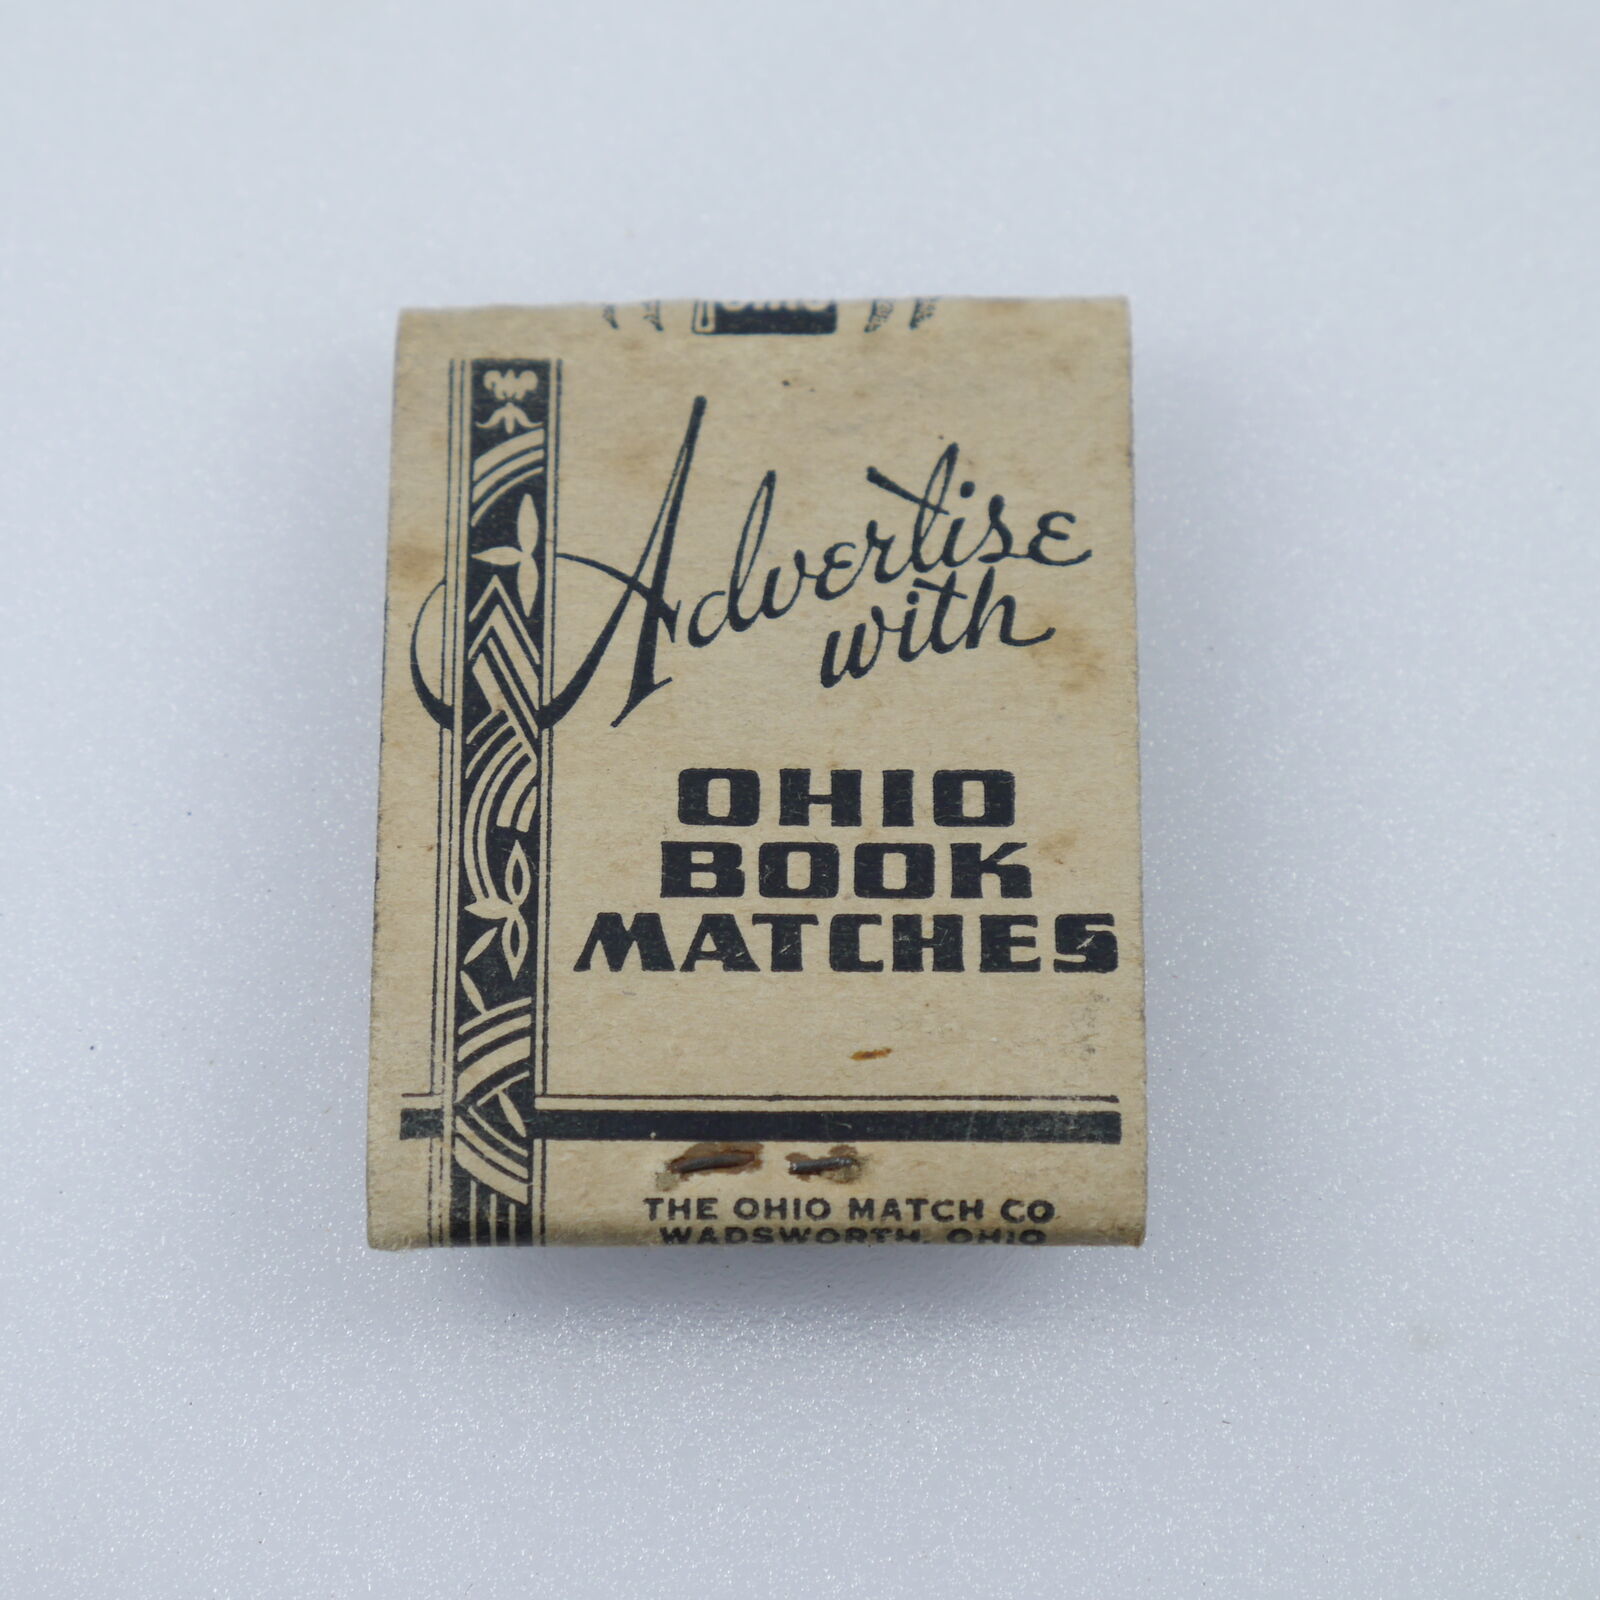 Advertise With Ohio Book Matches Matchbook Cover Vintage Struck